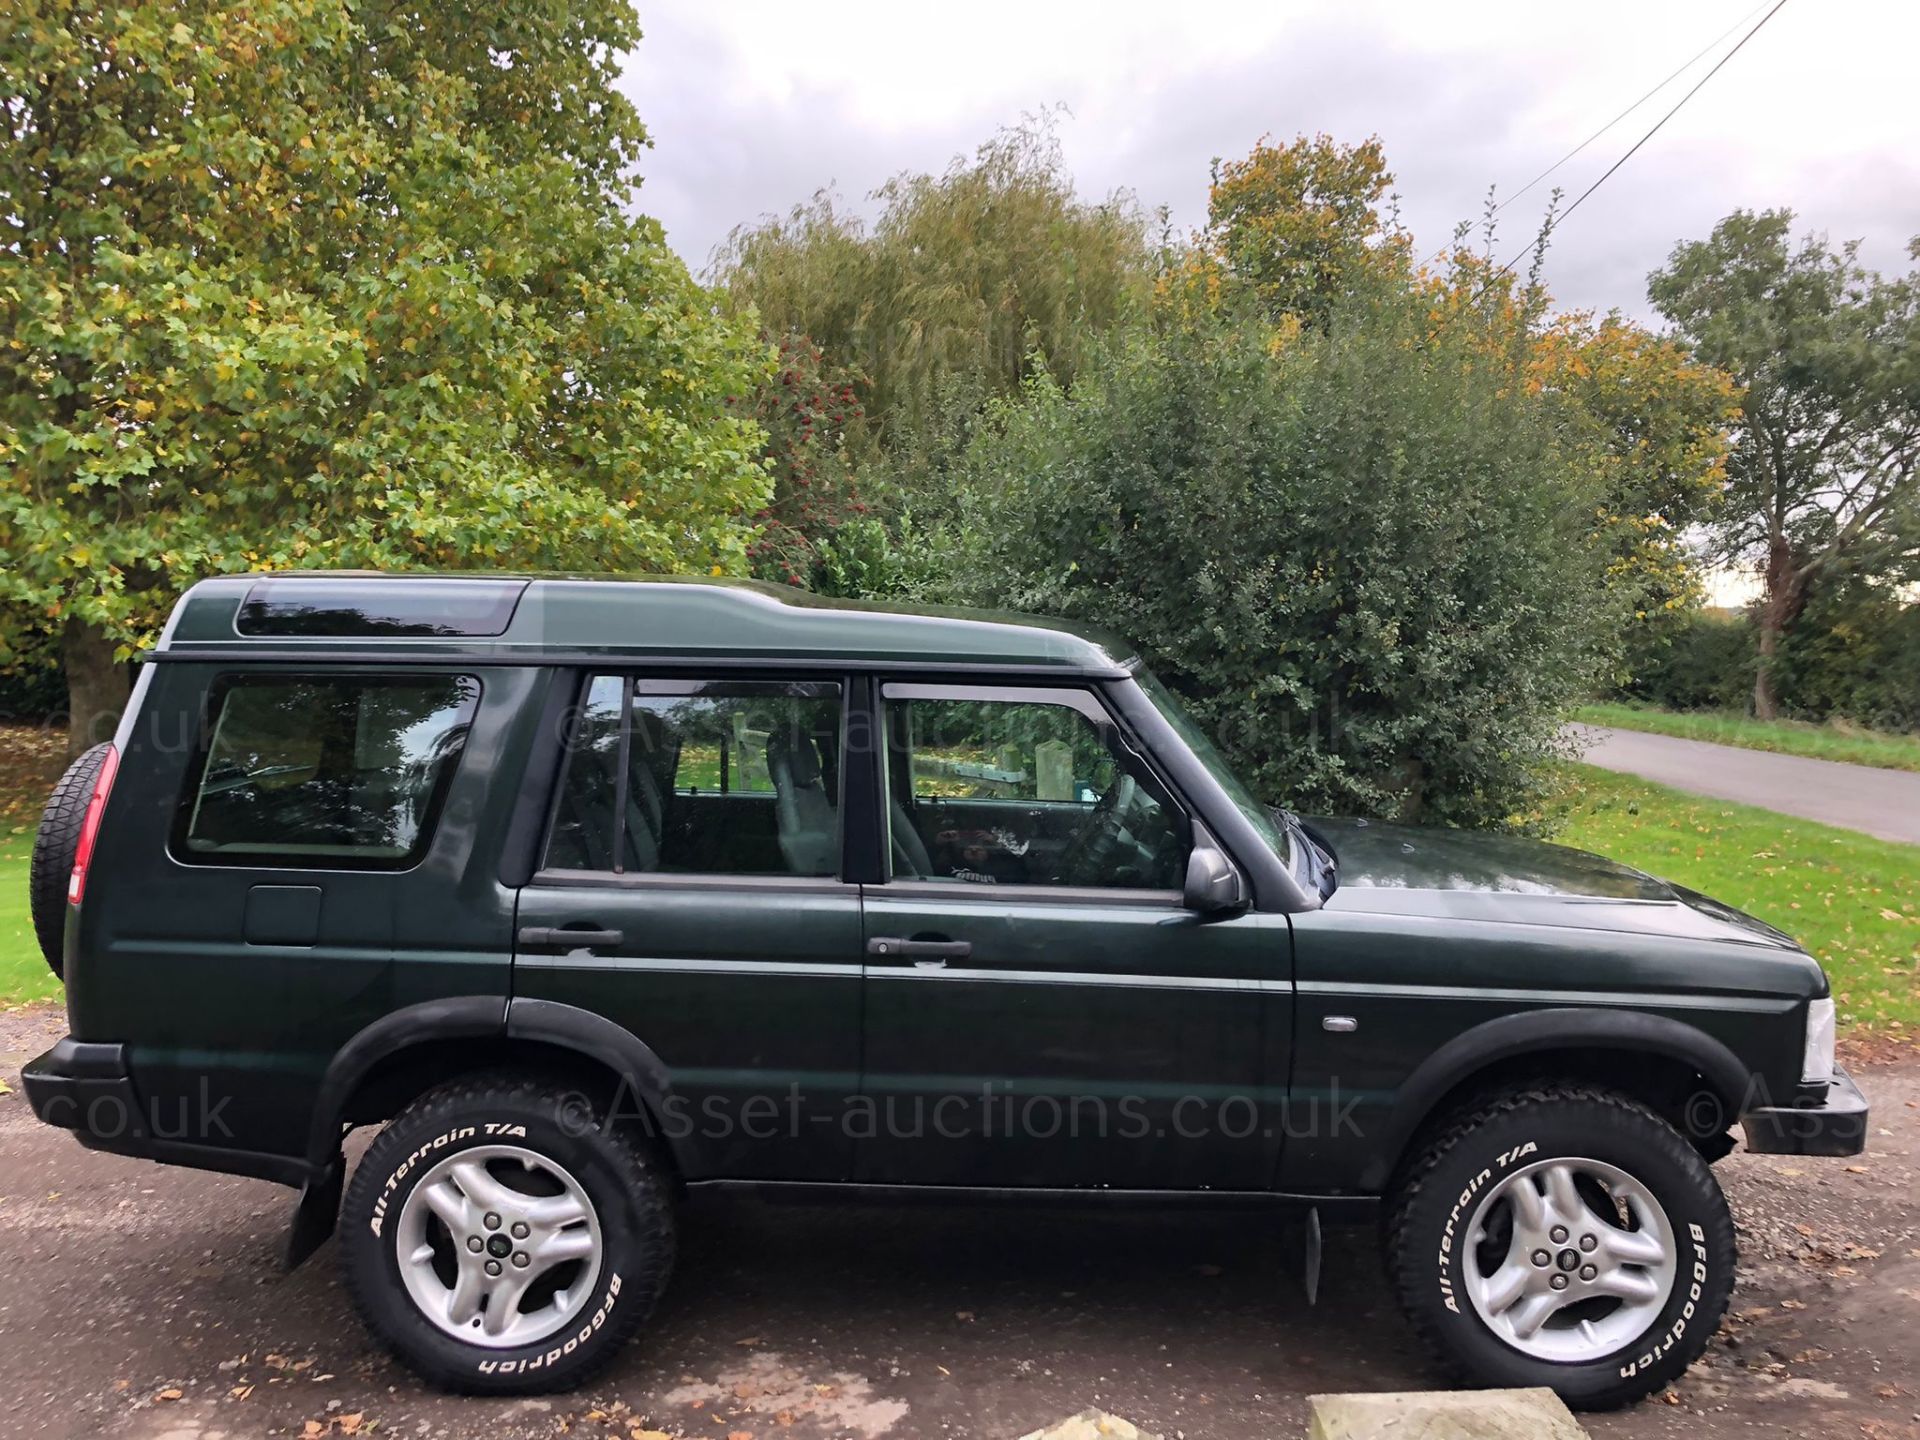 2002 LAND ROVER DISCOVERY TD5 S AUTO GREEN ESTATE, 139,862 MILES, 2.5 DIESEL *NO VAT* - Image 8 of 16